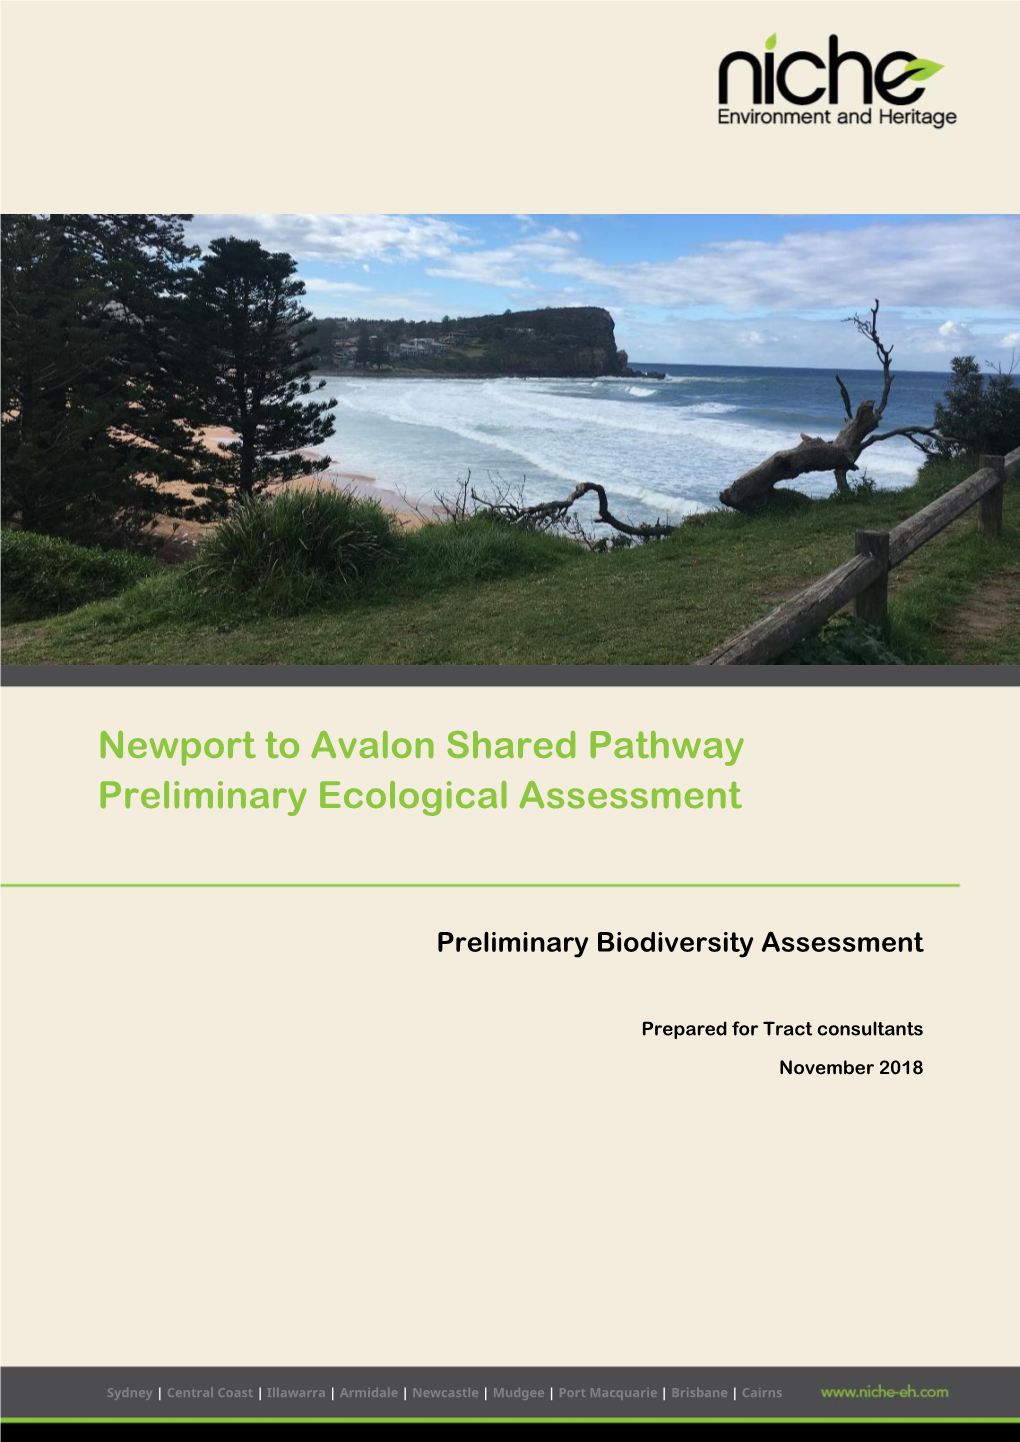 Newport to Avalon Shared Pathway Preliminary Ecological Assessment